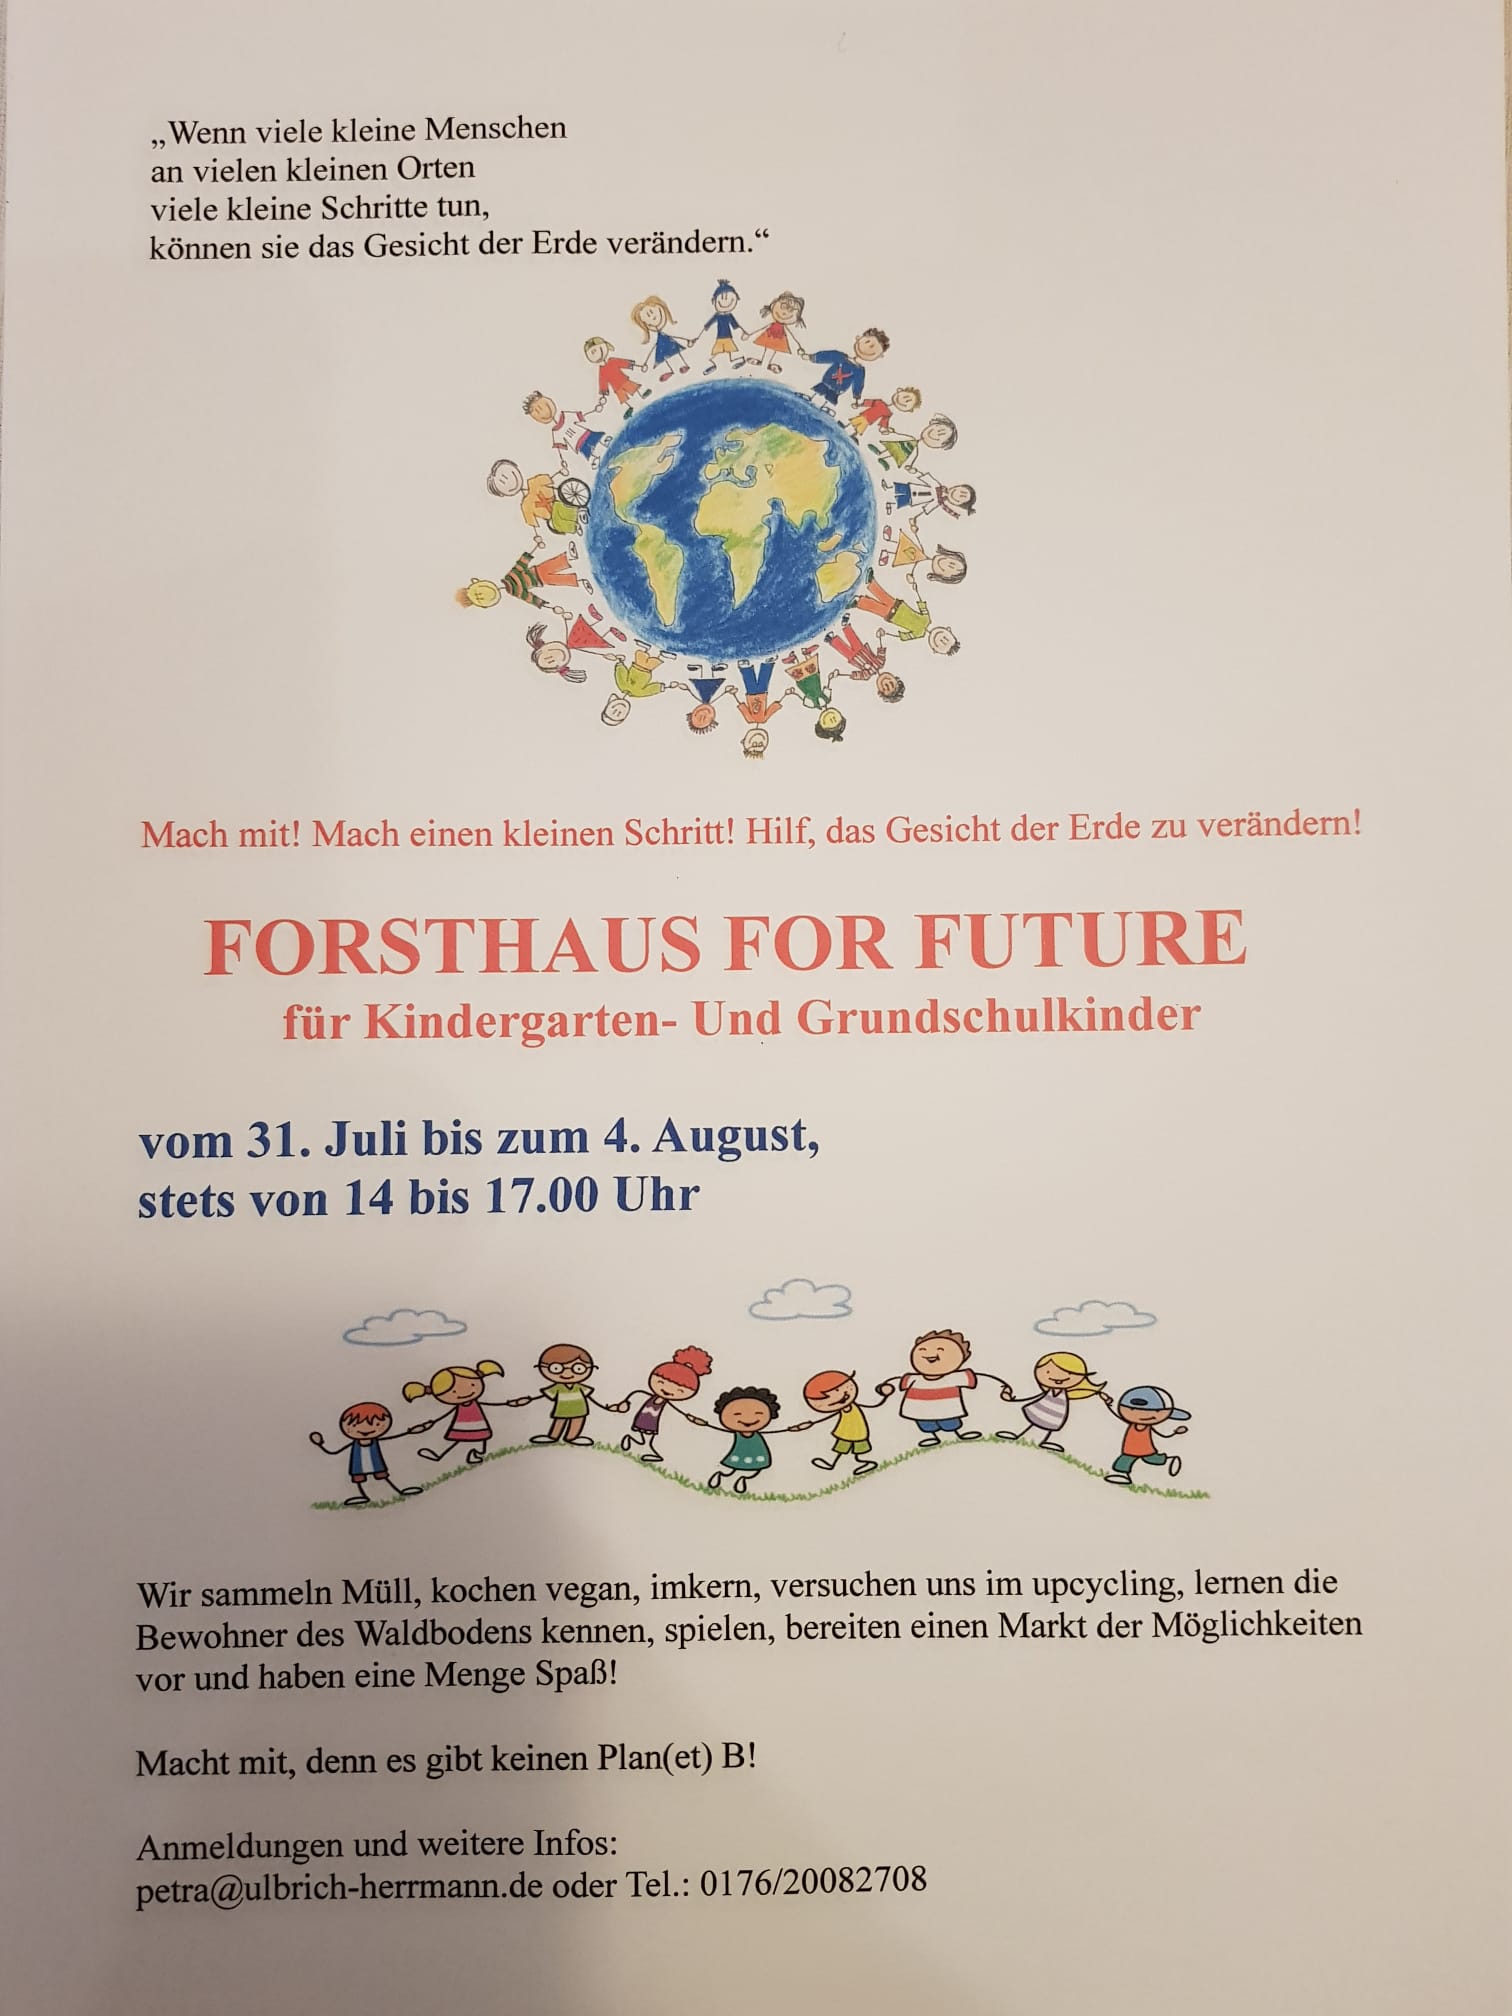 Forsthaus for Future